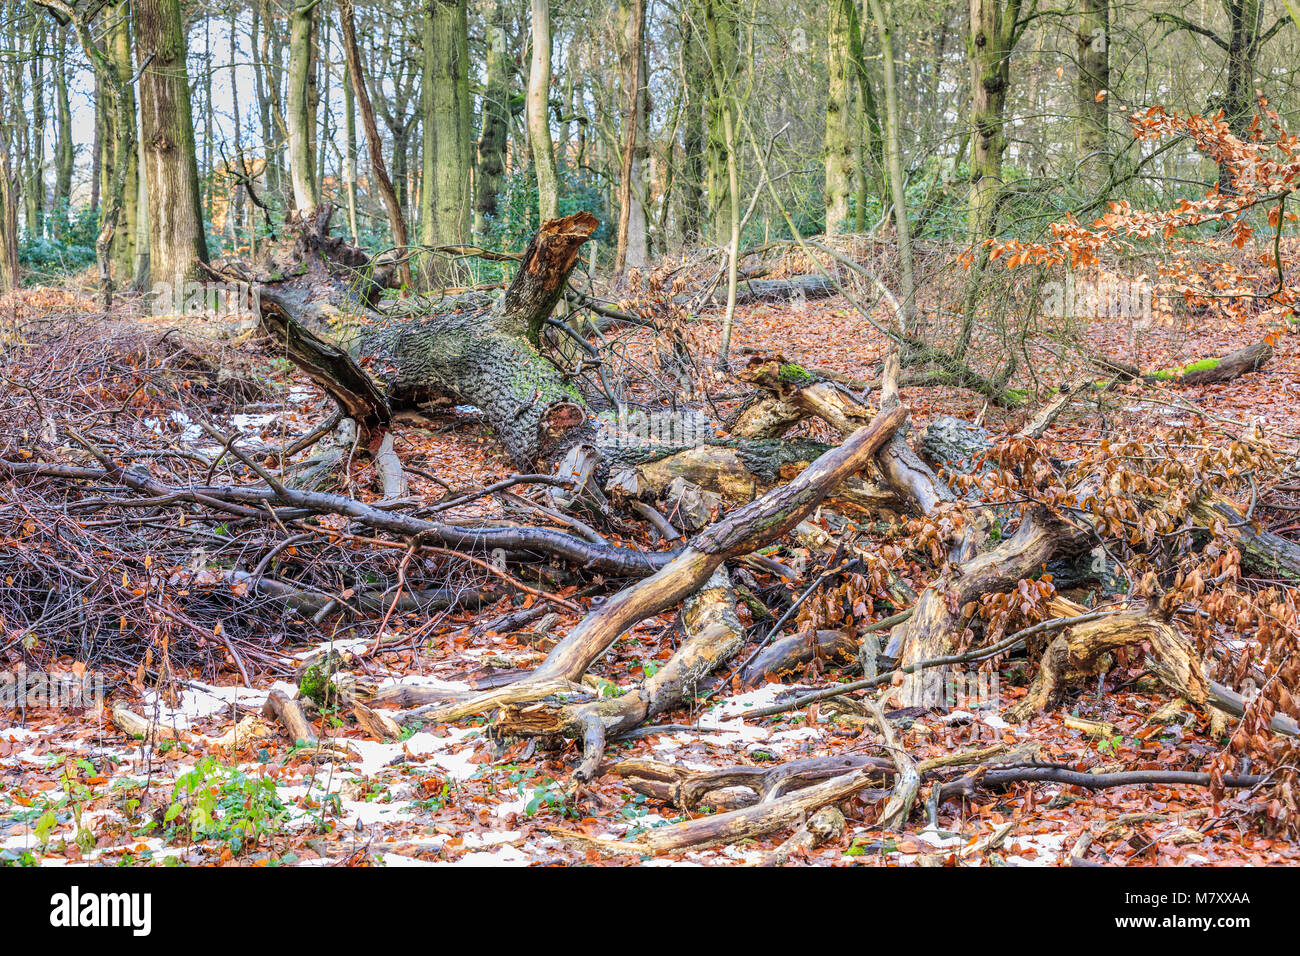 Fallen tree  with thick fluted trunk and branches broken off in a forest is to digest slowly to food for new trees has also a  biological potention Stock Photo